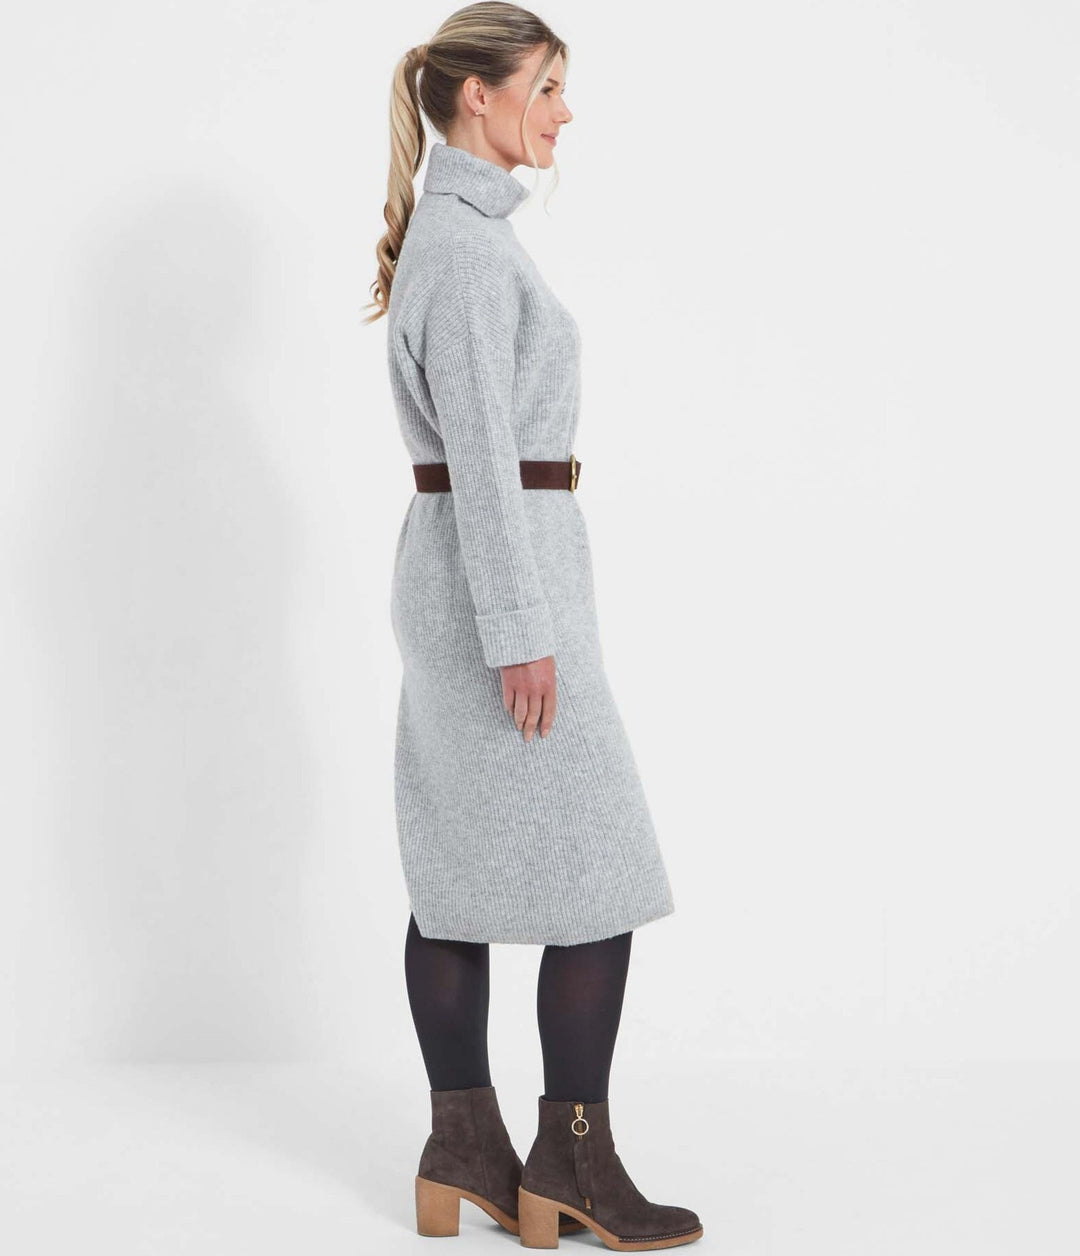 The Schoffel Ladies Thistle Knit Dress in Grey#Grey